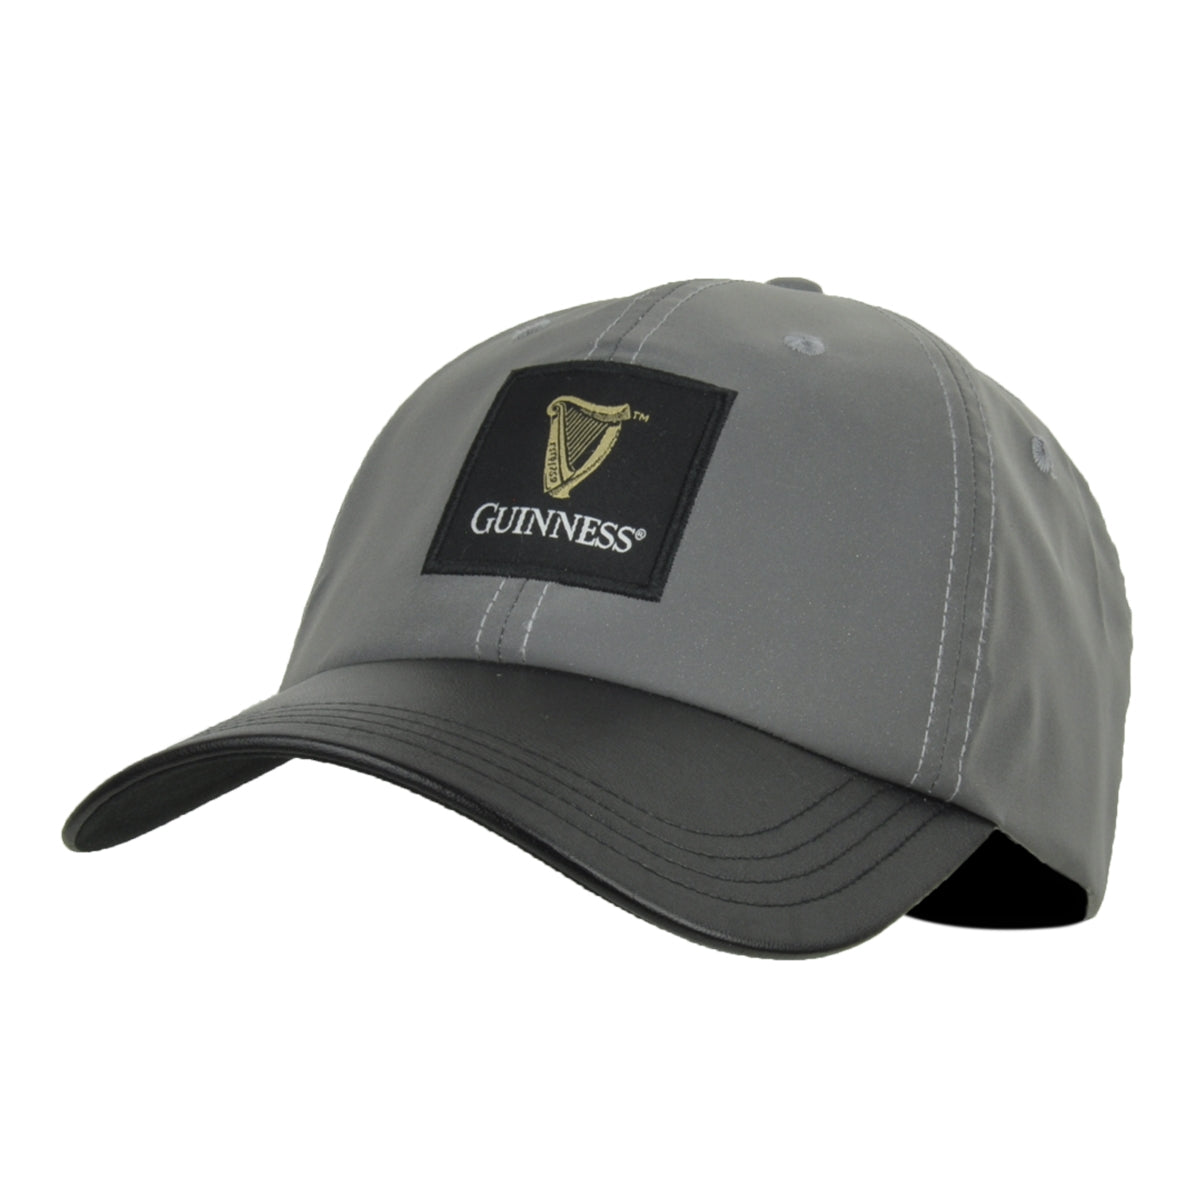 A gray Guinness UK Reflective Cap with a Guinness logo on the front and an adjustable snapback closure.